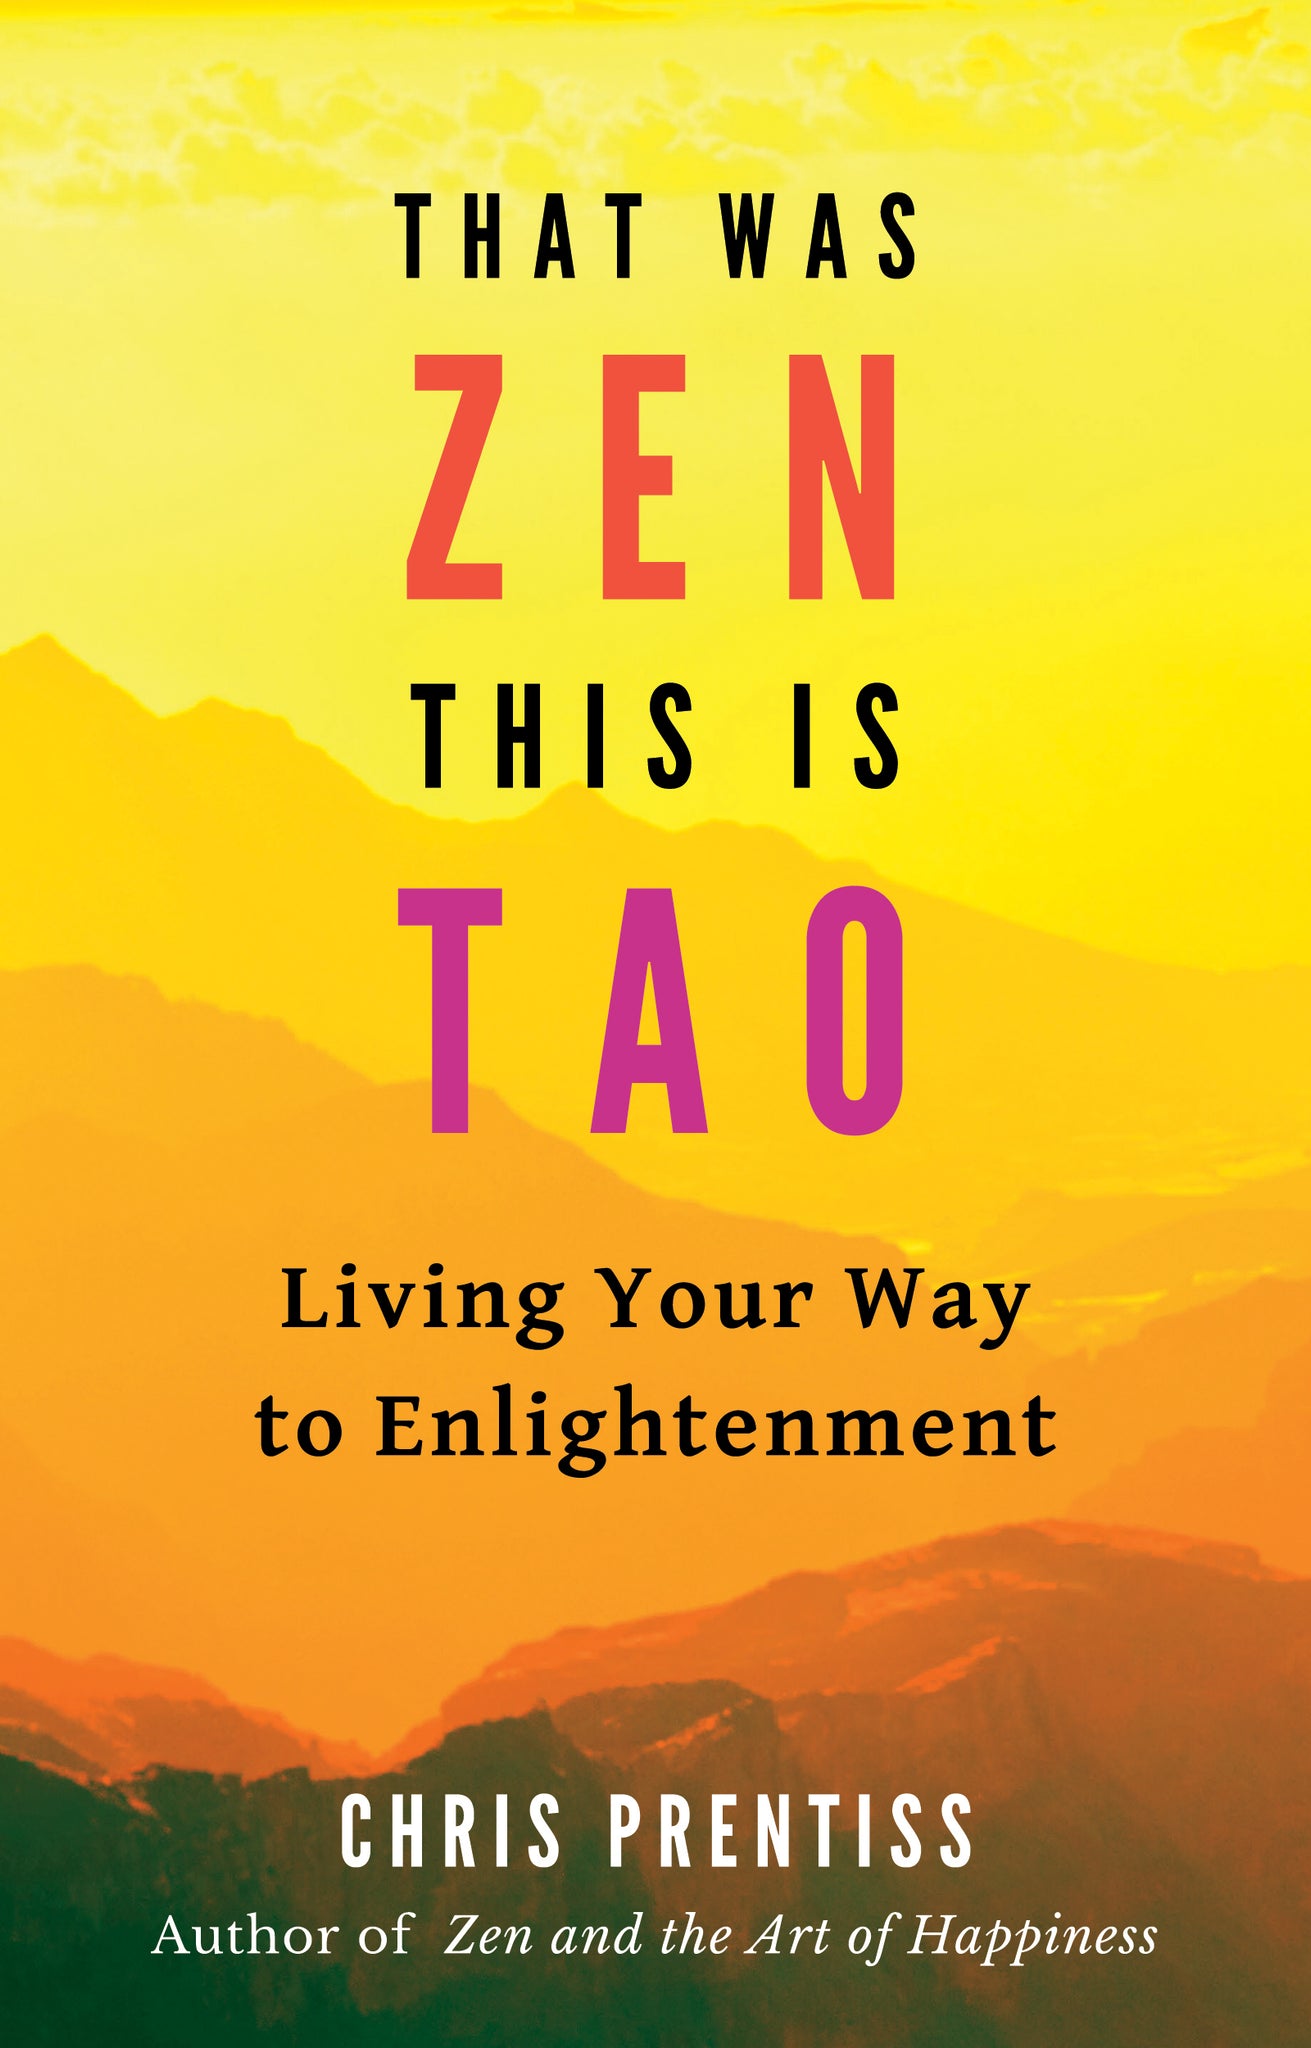 That Was Zen, This Is Tao (Kindle Edition)